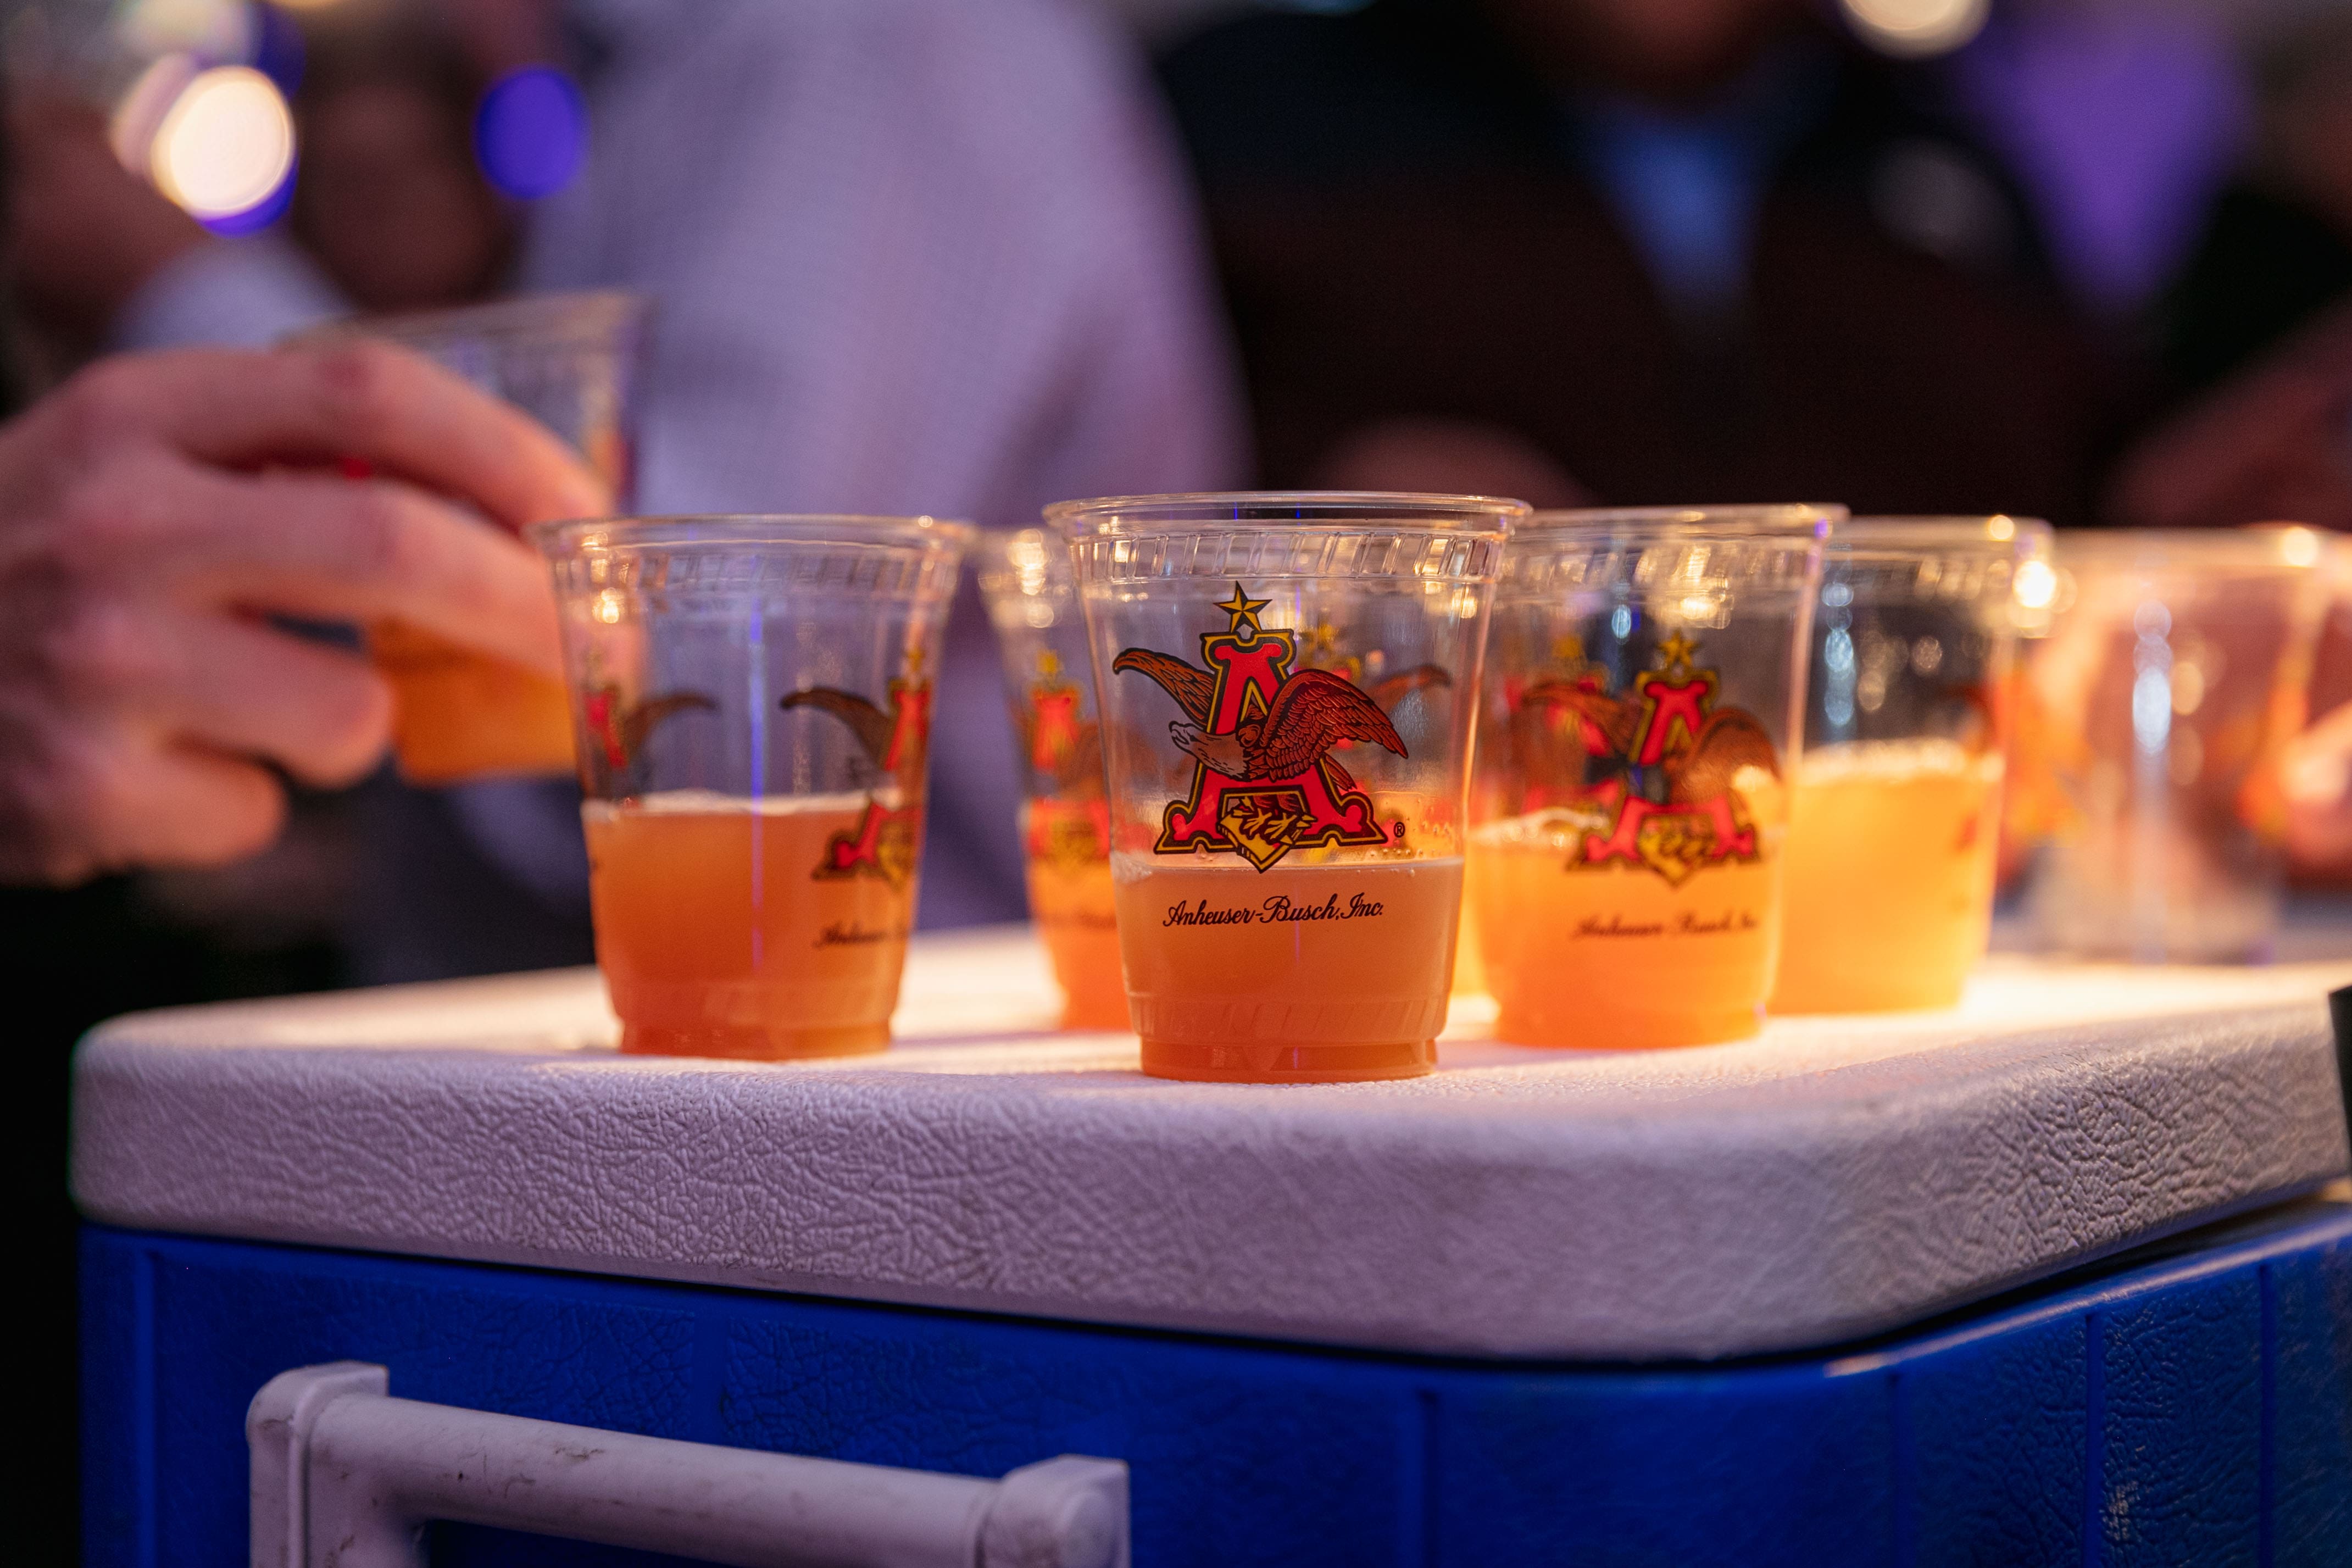 Anheuser-Busch Kicks Off Its Fifth Annual Brew Across America Congressional Brewing Competition in St. Louis